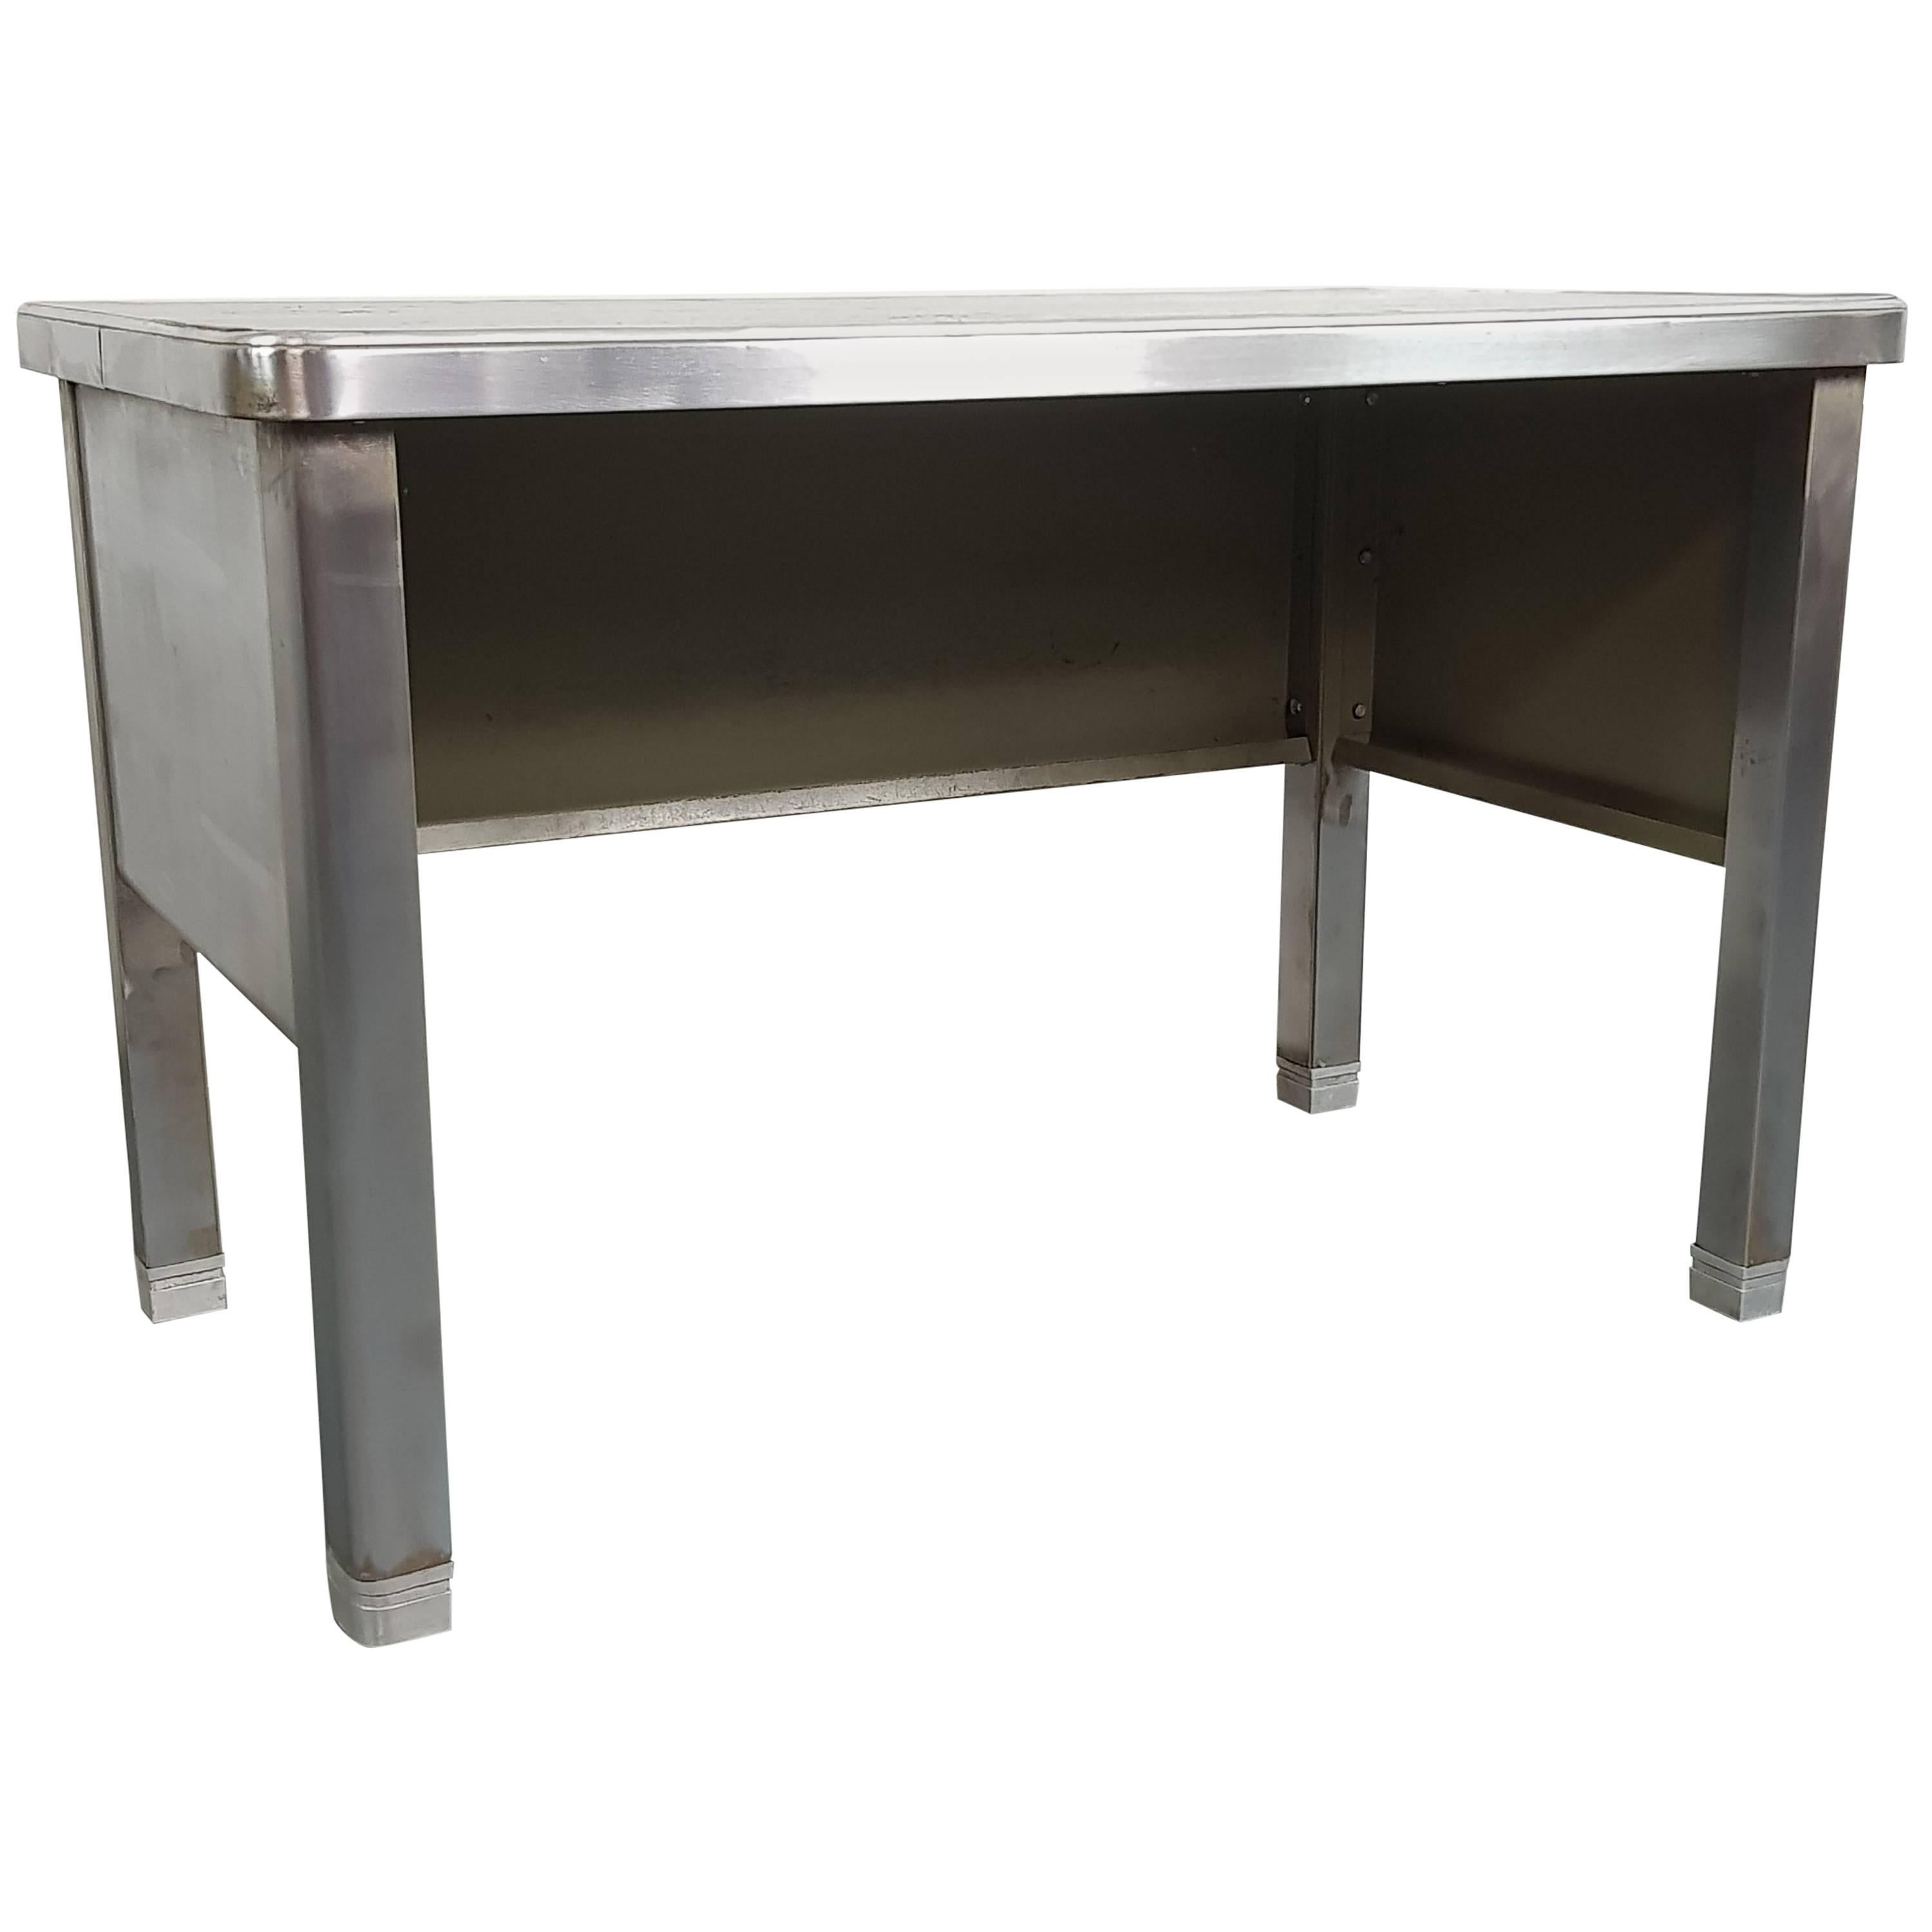 Vintage Industrial Stripped and Polished Steel Desk from 1960 For Sale